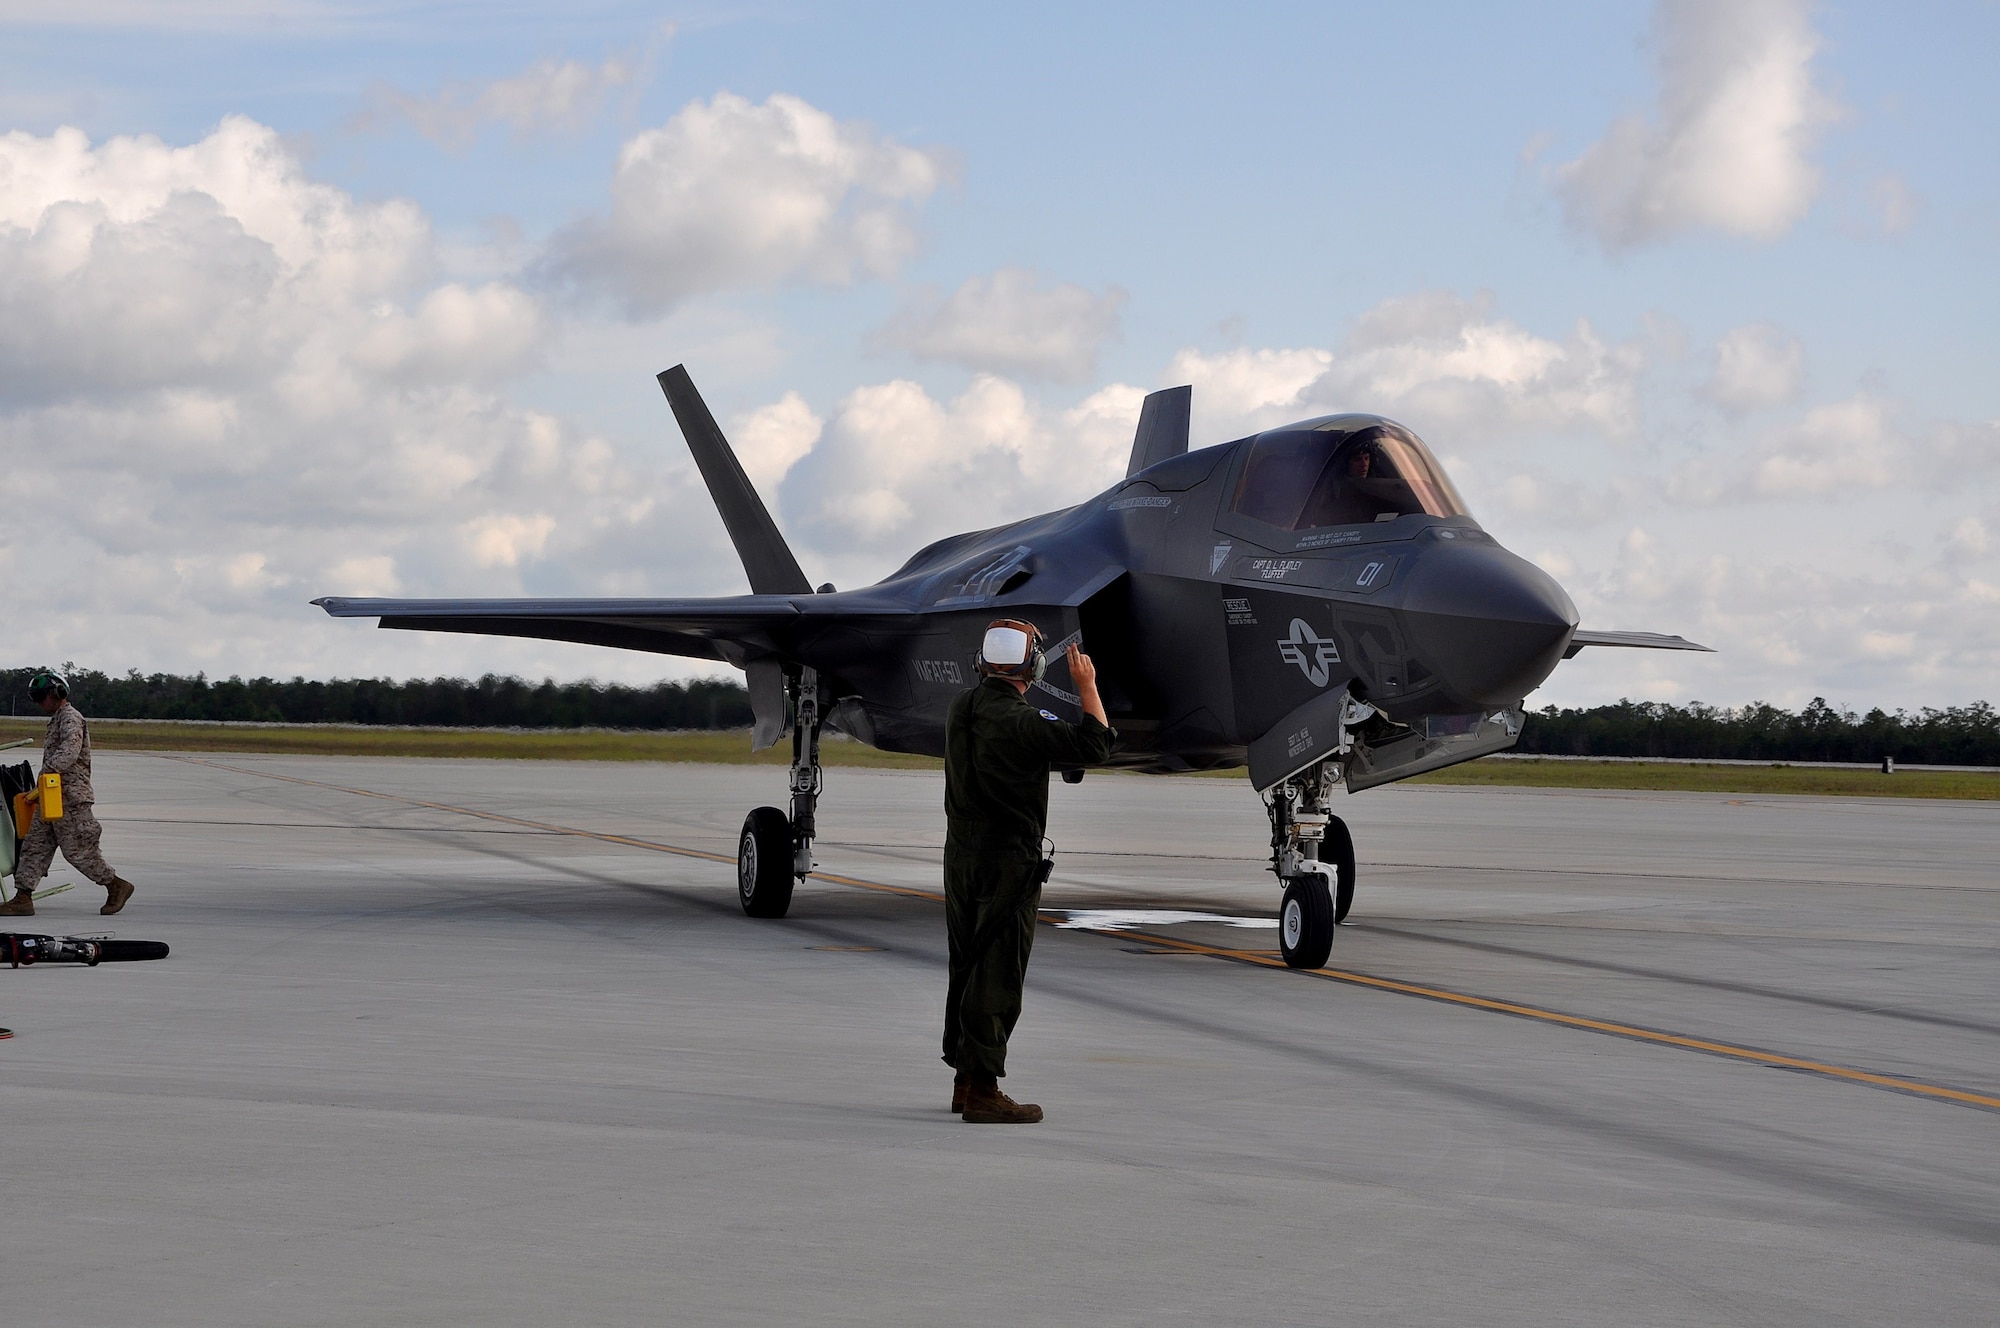 A U.S. Marine Corps plane captain, known as a crew chief in the Air Force, marshals out an F-35B Lightning II short takeoff and vertical landing variant of the aircraft May 22, 2013, at Eglin Air Force Base. The maintainer orchestrated a "hot pit" ground refueling, running the engine while receiving fuel, allowing it to take off immediately afterward for another training sortie. Assigned to the Marine Fighter Attack Training Squadron-501, the plane captain helped train up 24 U.S. and United Kingdom pilots flying the B variant to date by having aircraft ready for the daily flight operations. 